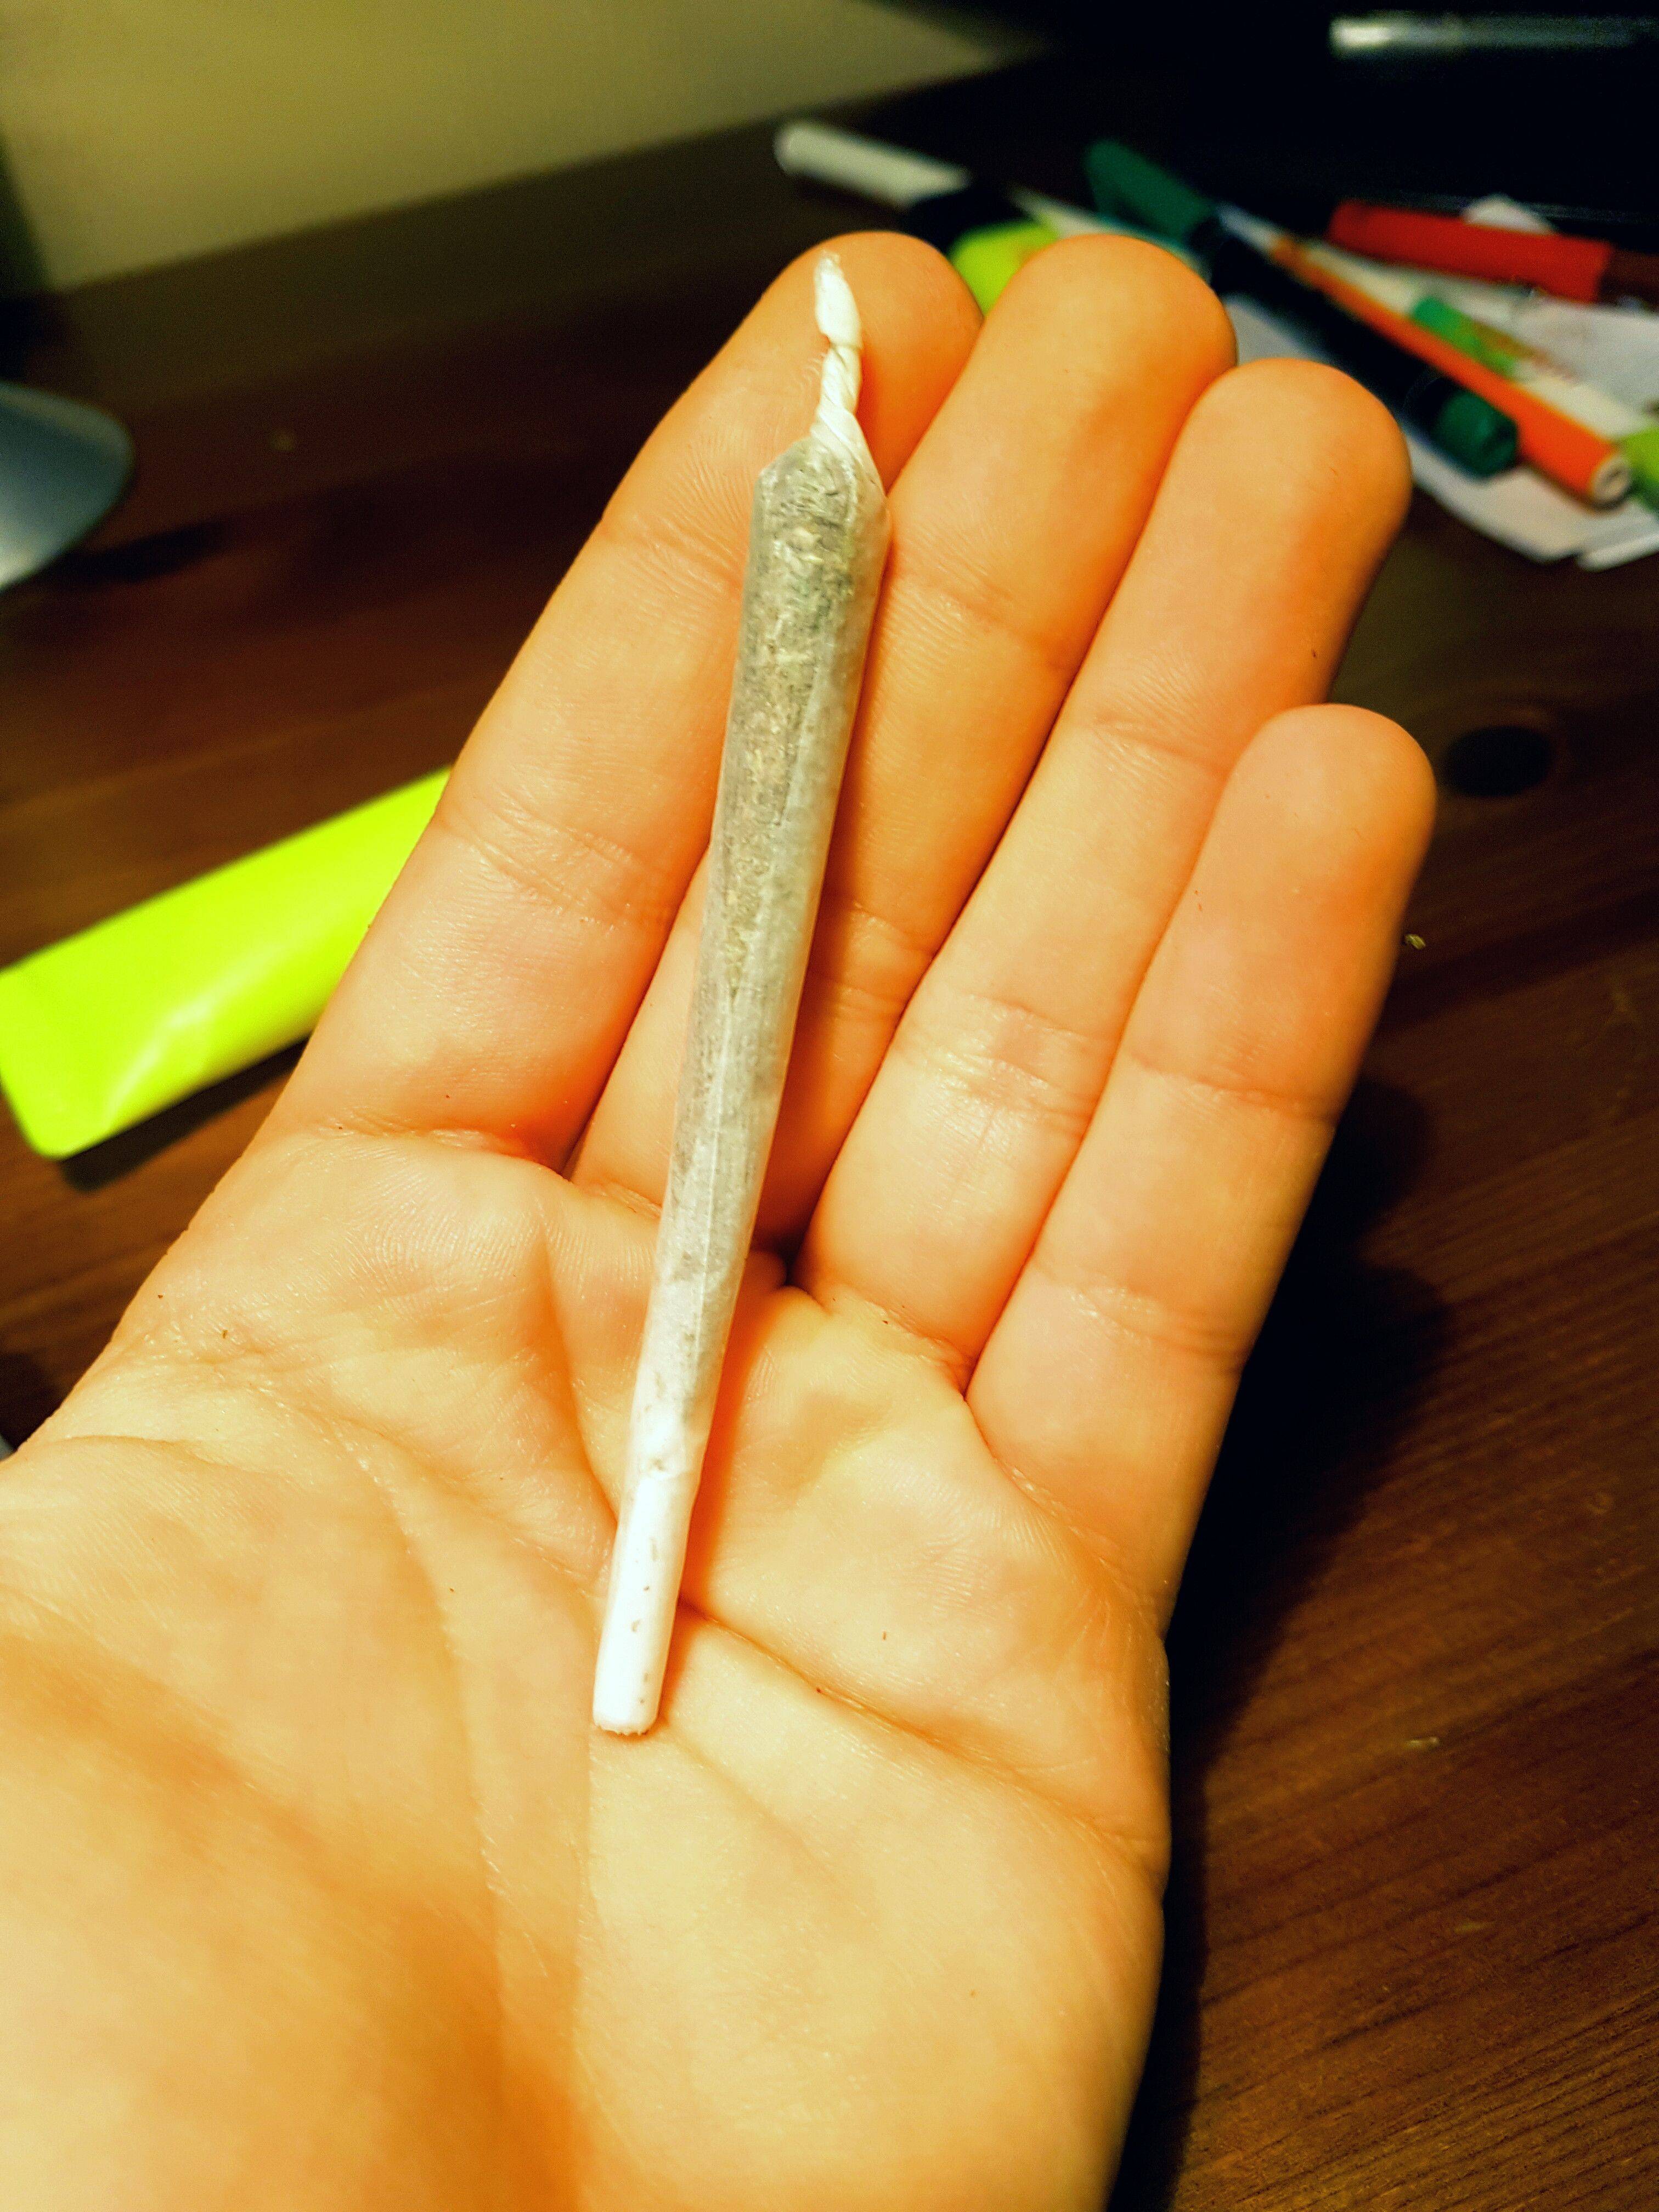 Rolling joint